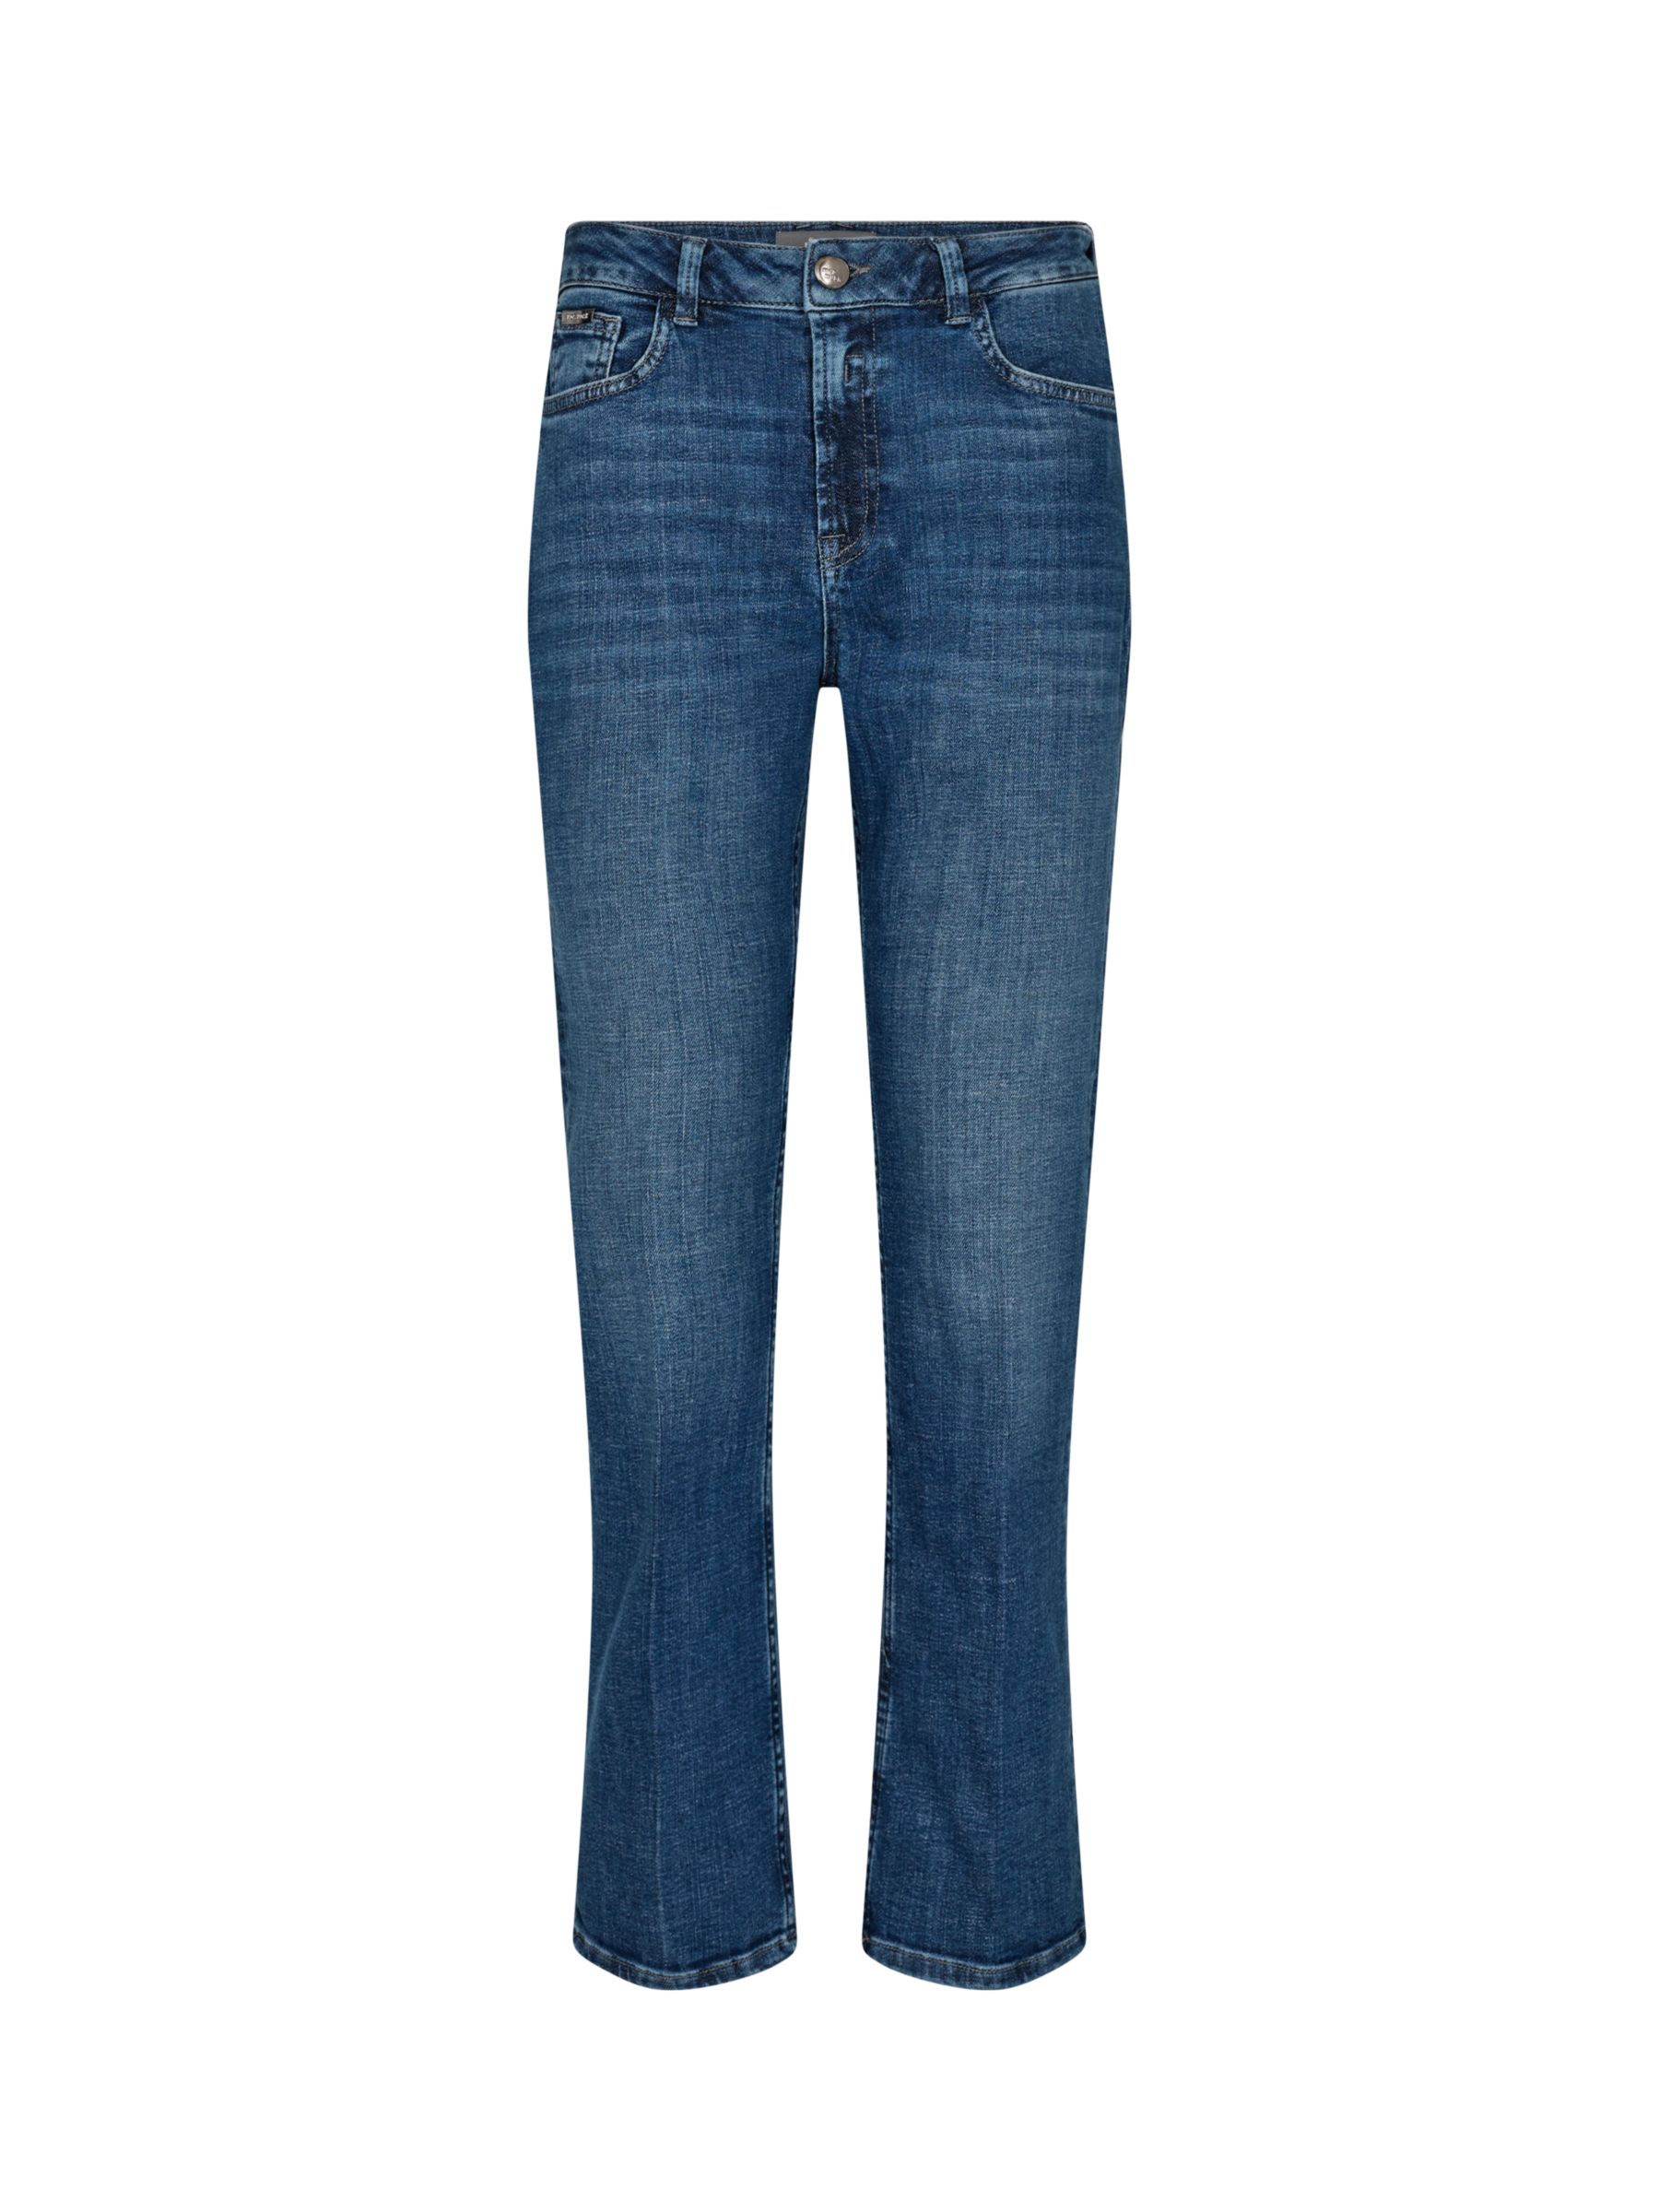 Buy MOS MOSH Everest Ave Mid Rise Straight Jeans, Blue Online at johnlewis.com